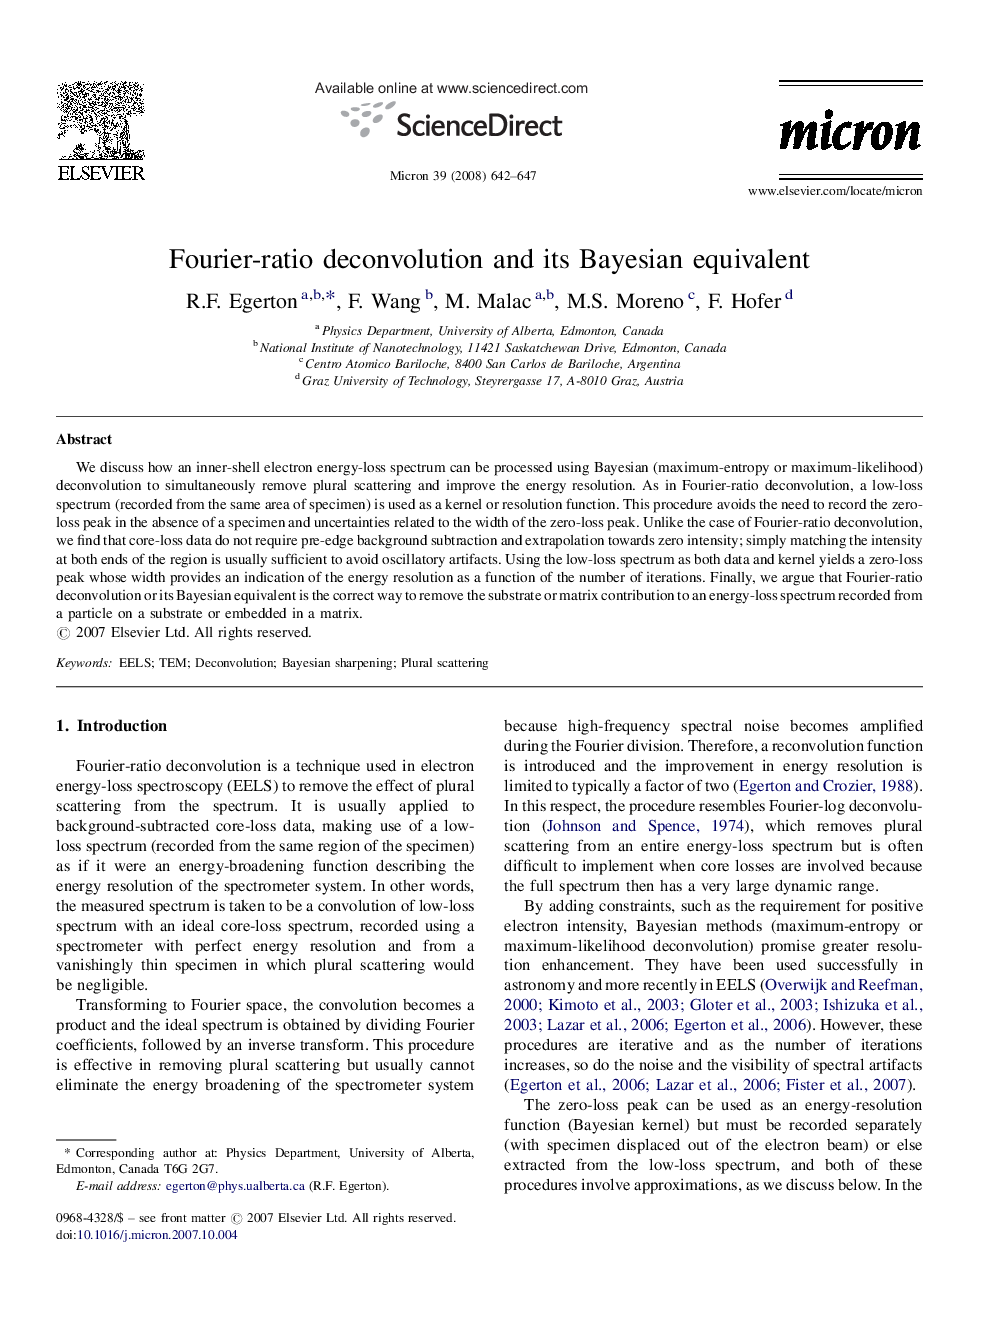 Fourier-ratio deconvolution and its Bayesian equivalent